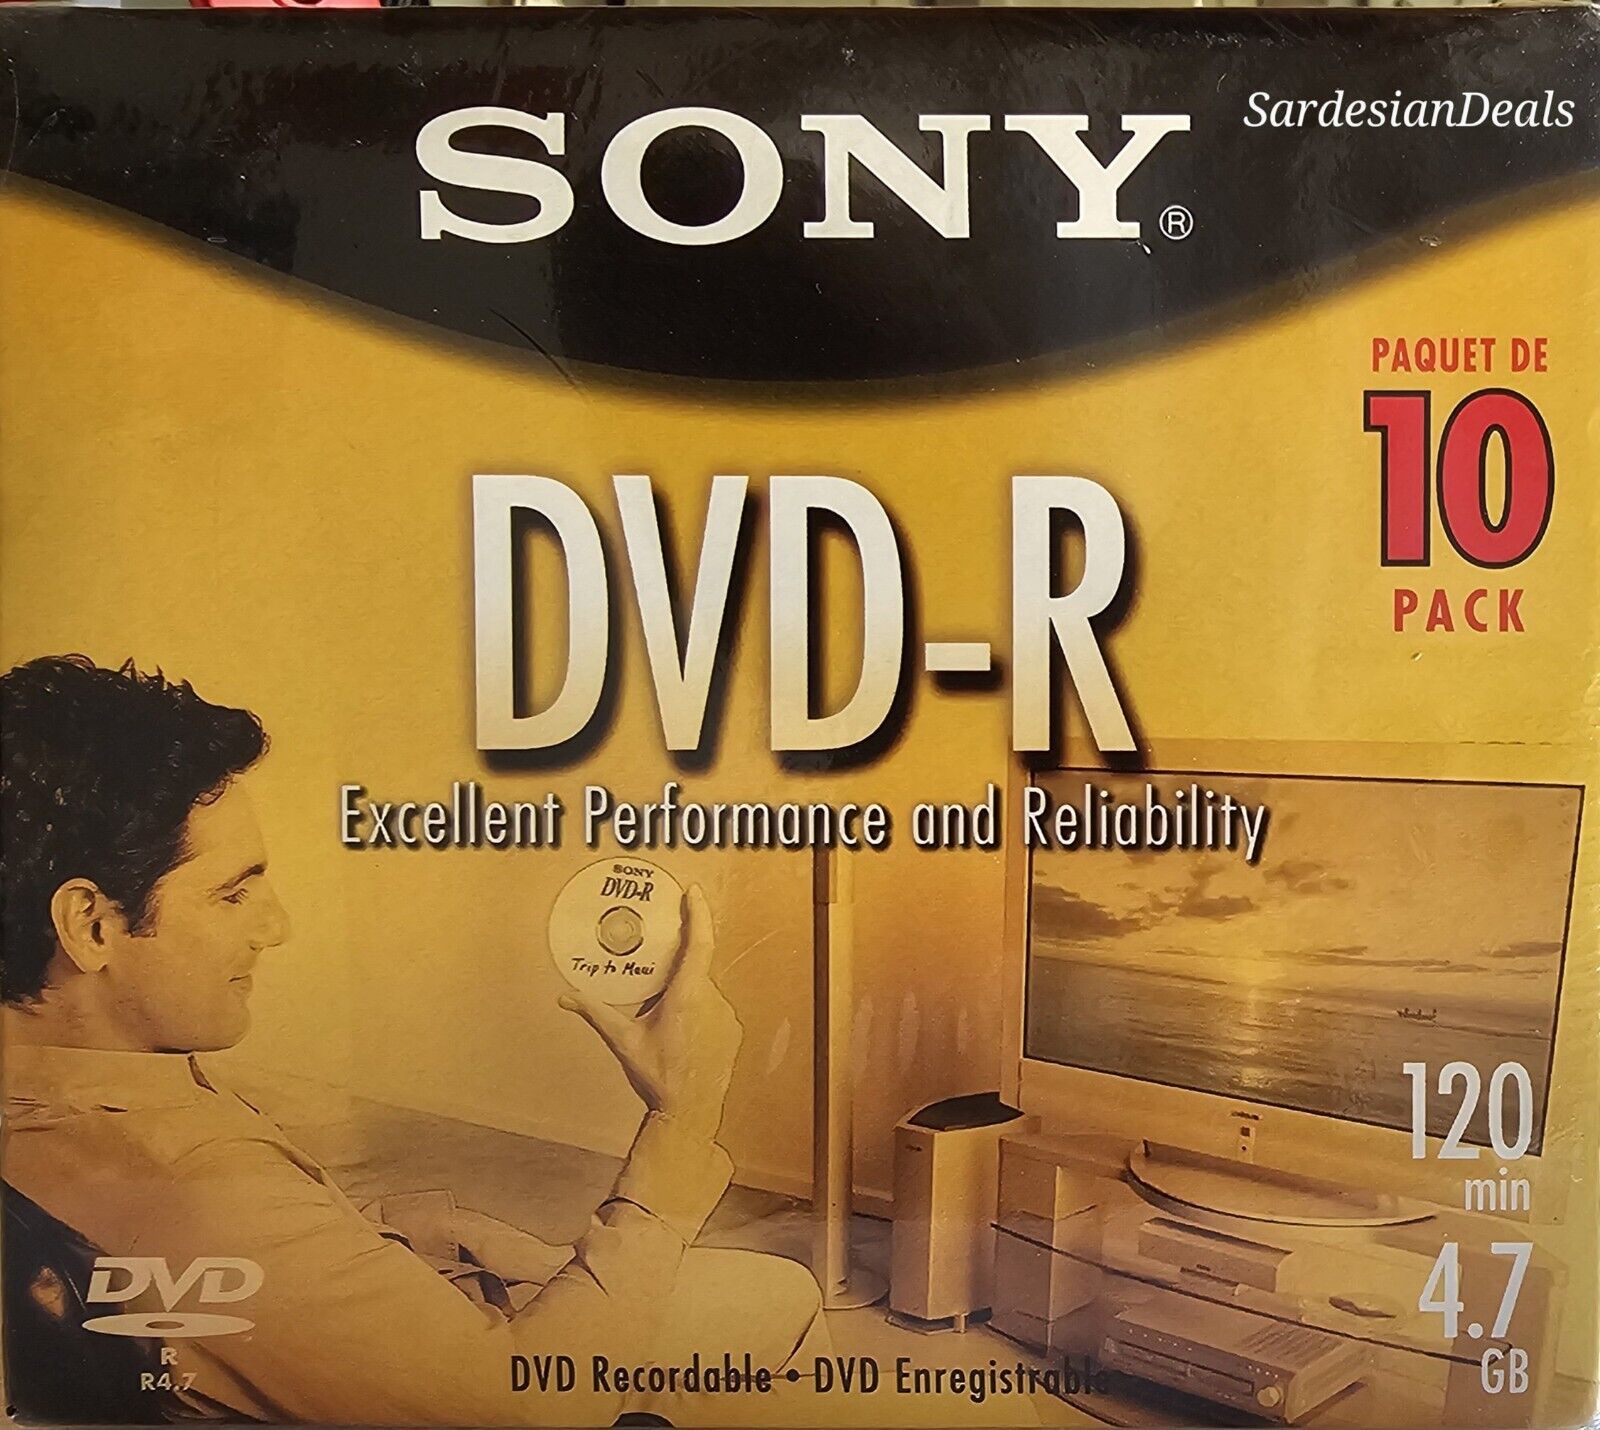 Sony DVD-R 4.7GB 120 Minute Blank Disc 10-Pack New Sealed 